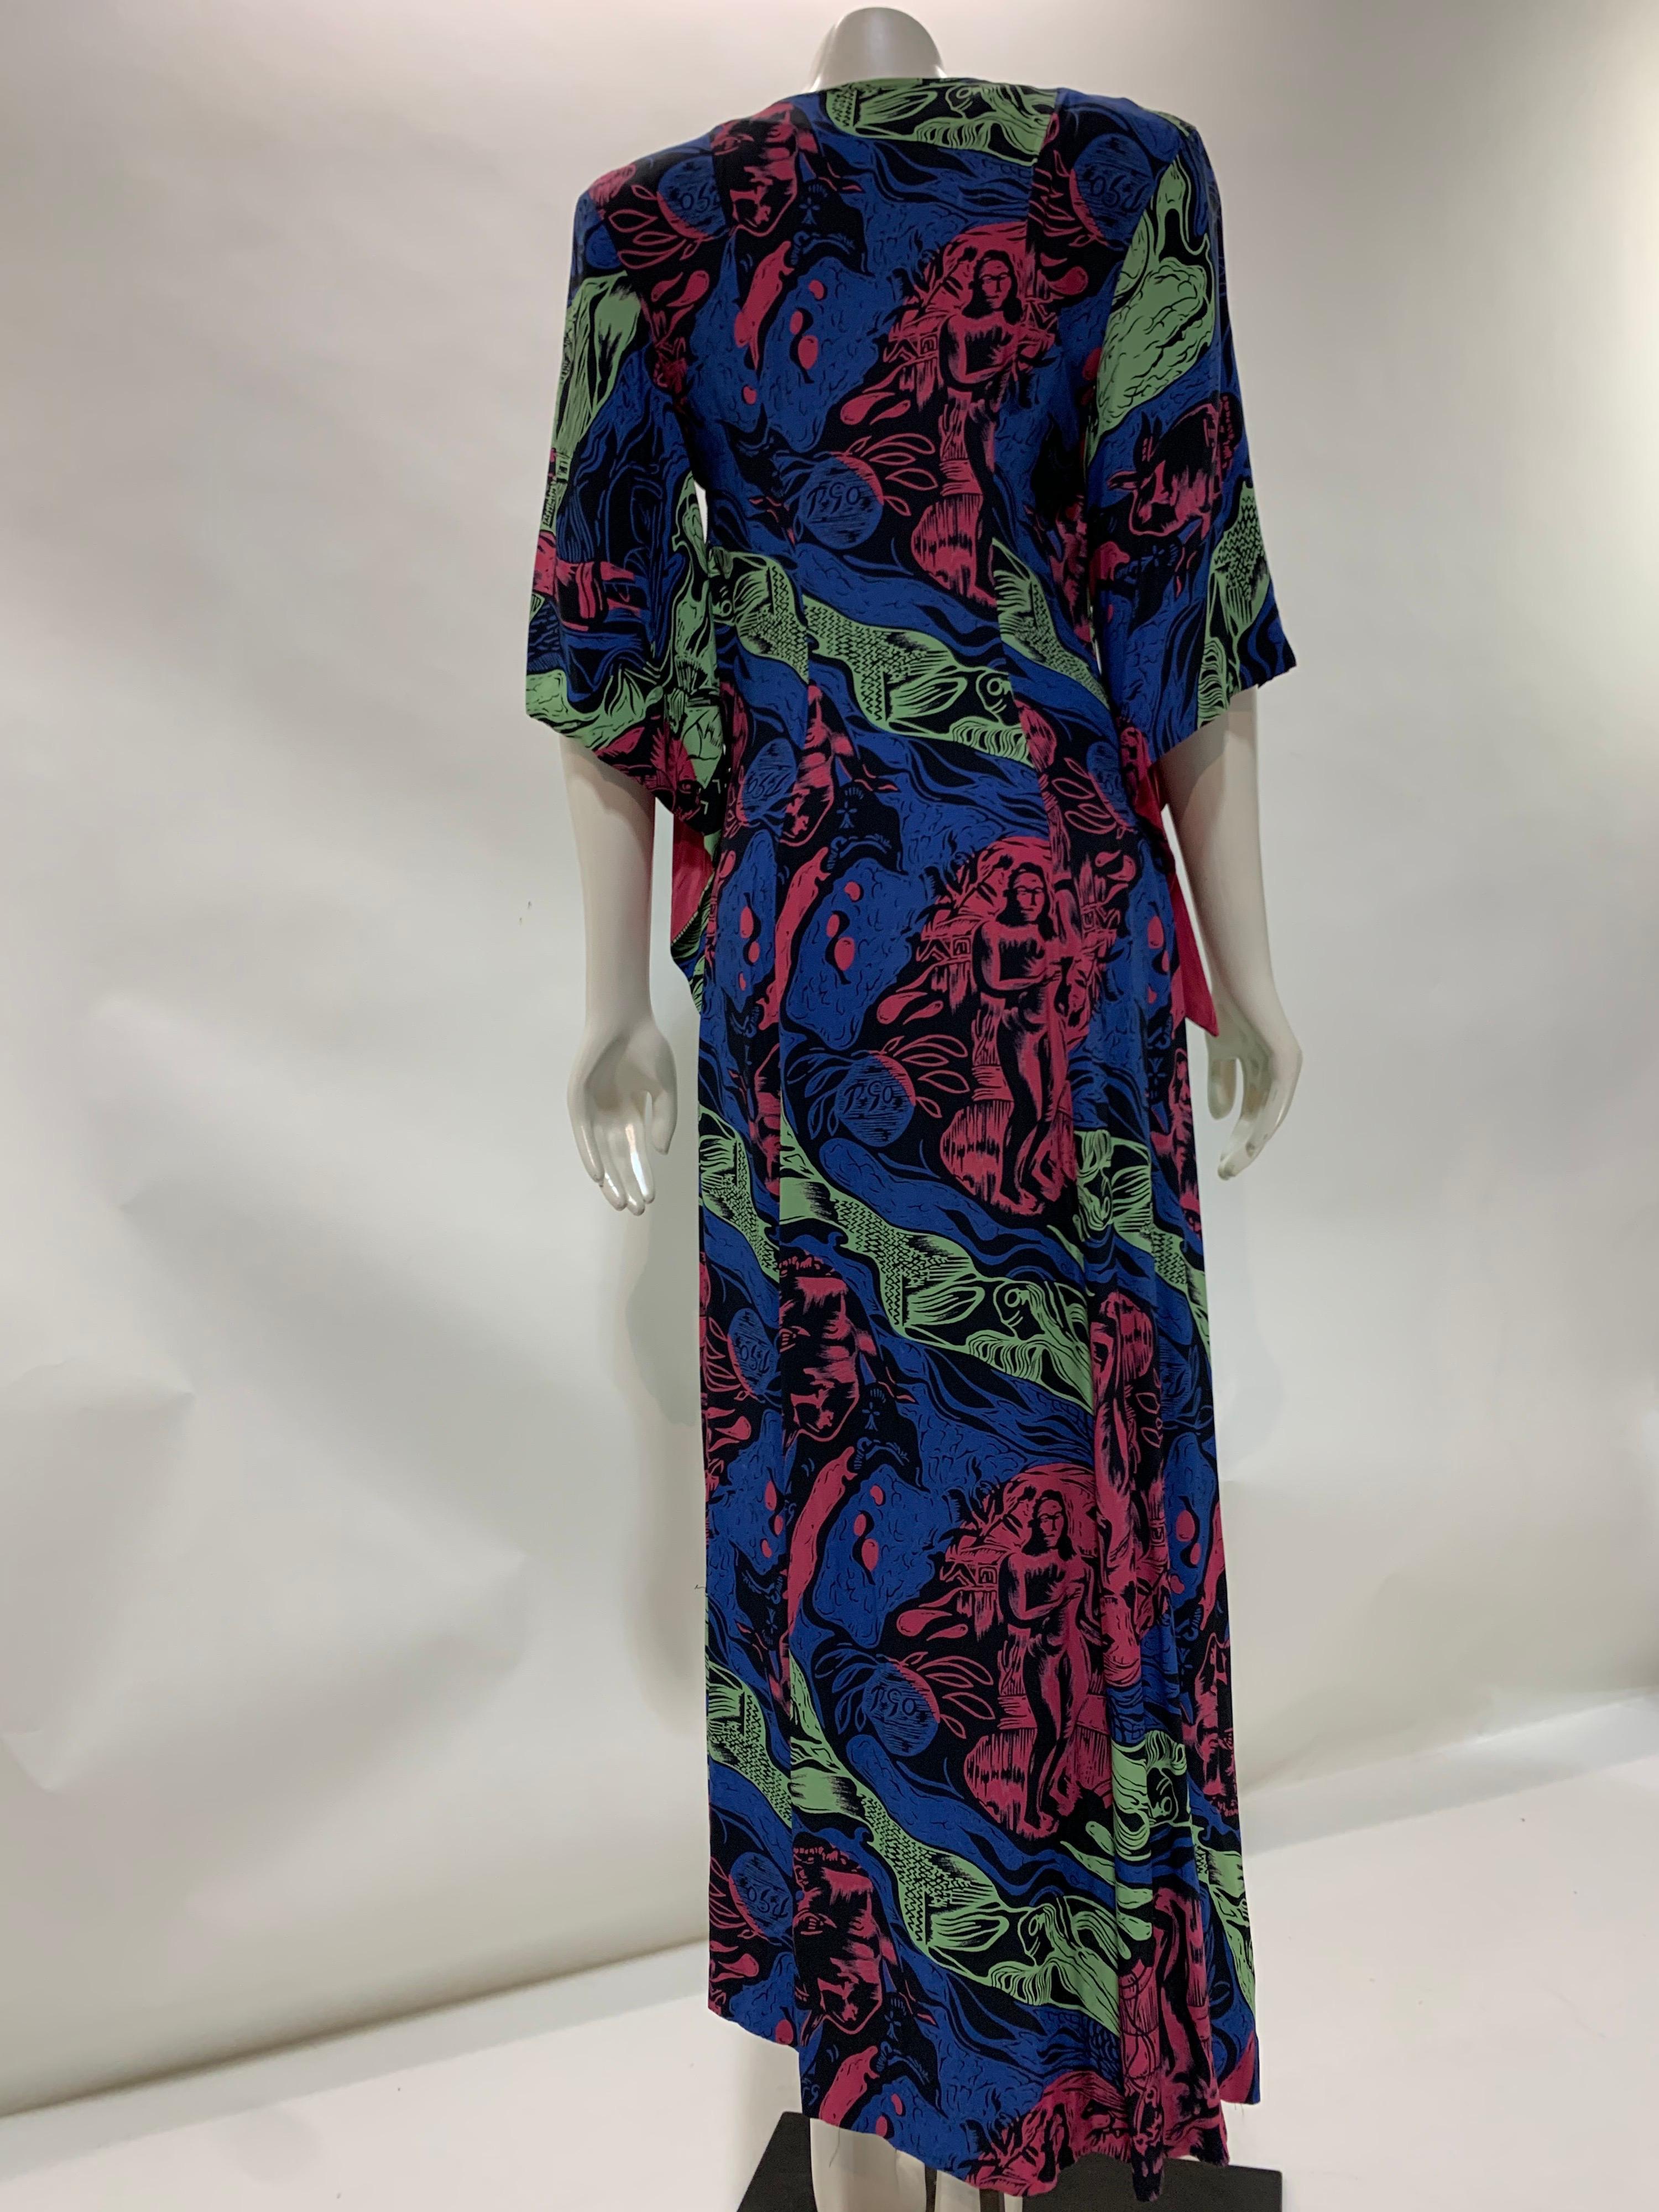 1940s Kamehameha Graphic Figural Print Rayon Dress in Polynesian Style For Sale 3